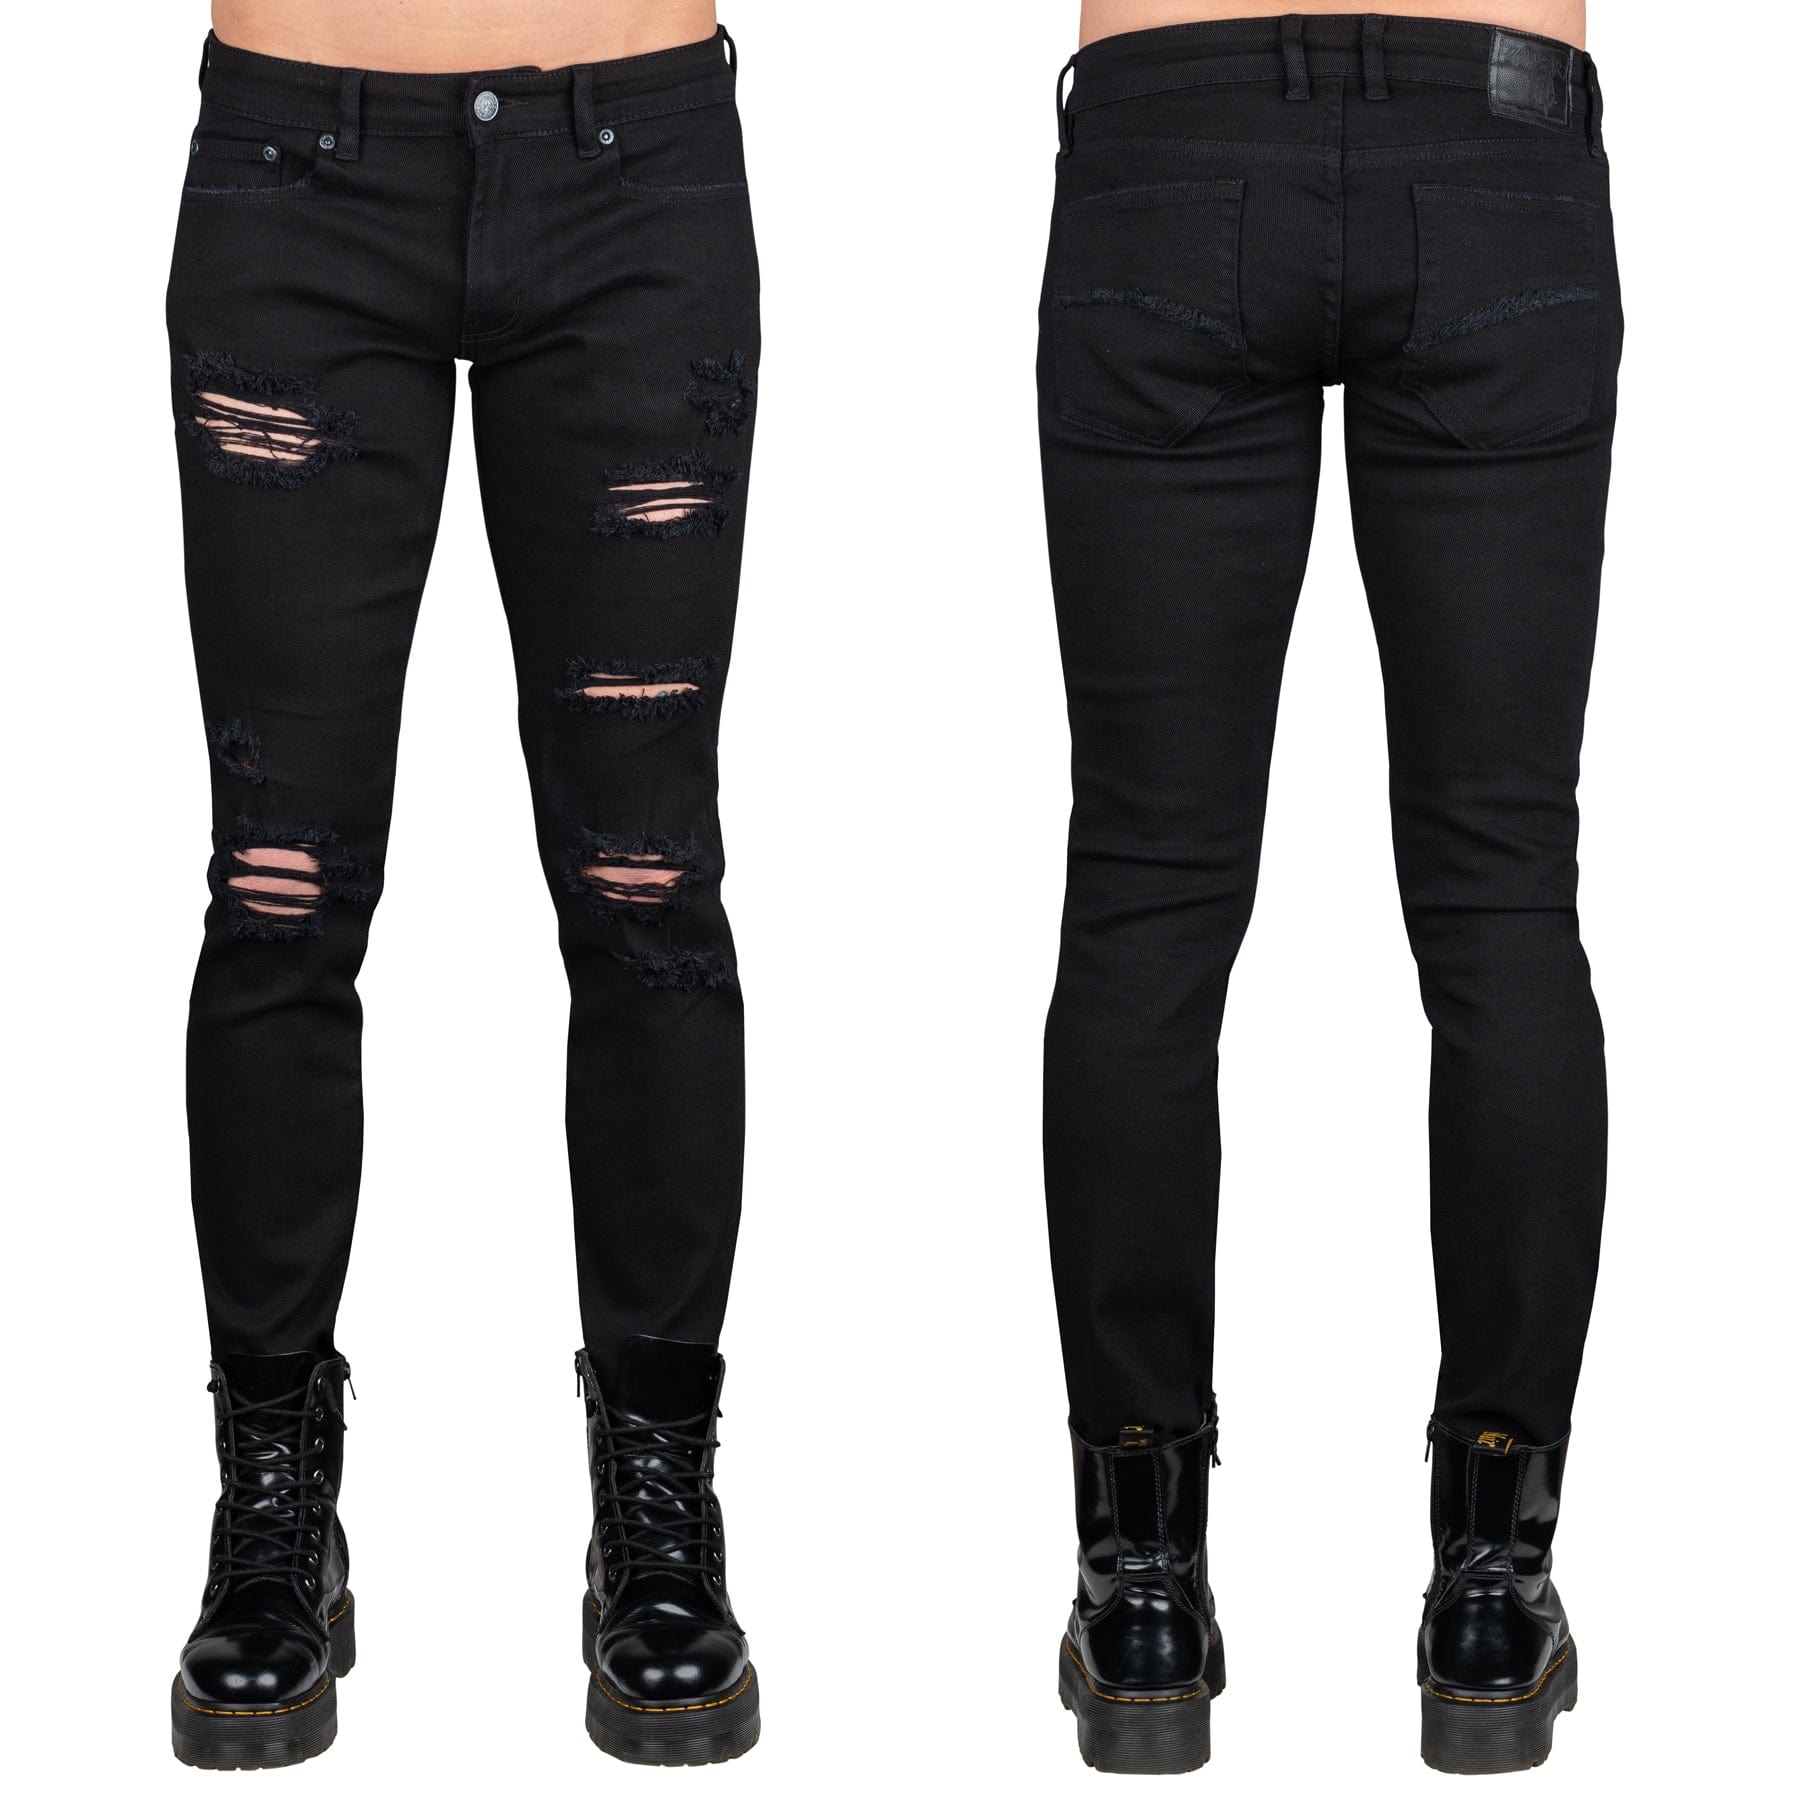 Essentials Collection Pants Rampager Shredded Jeans - Black